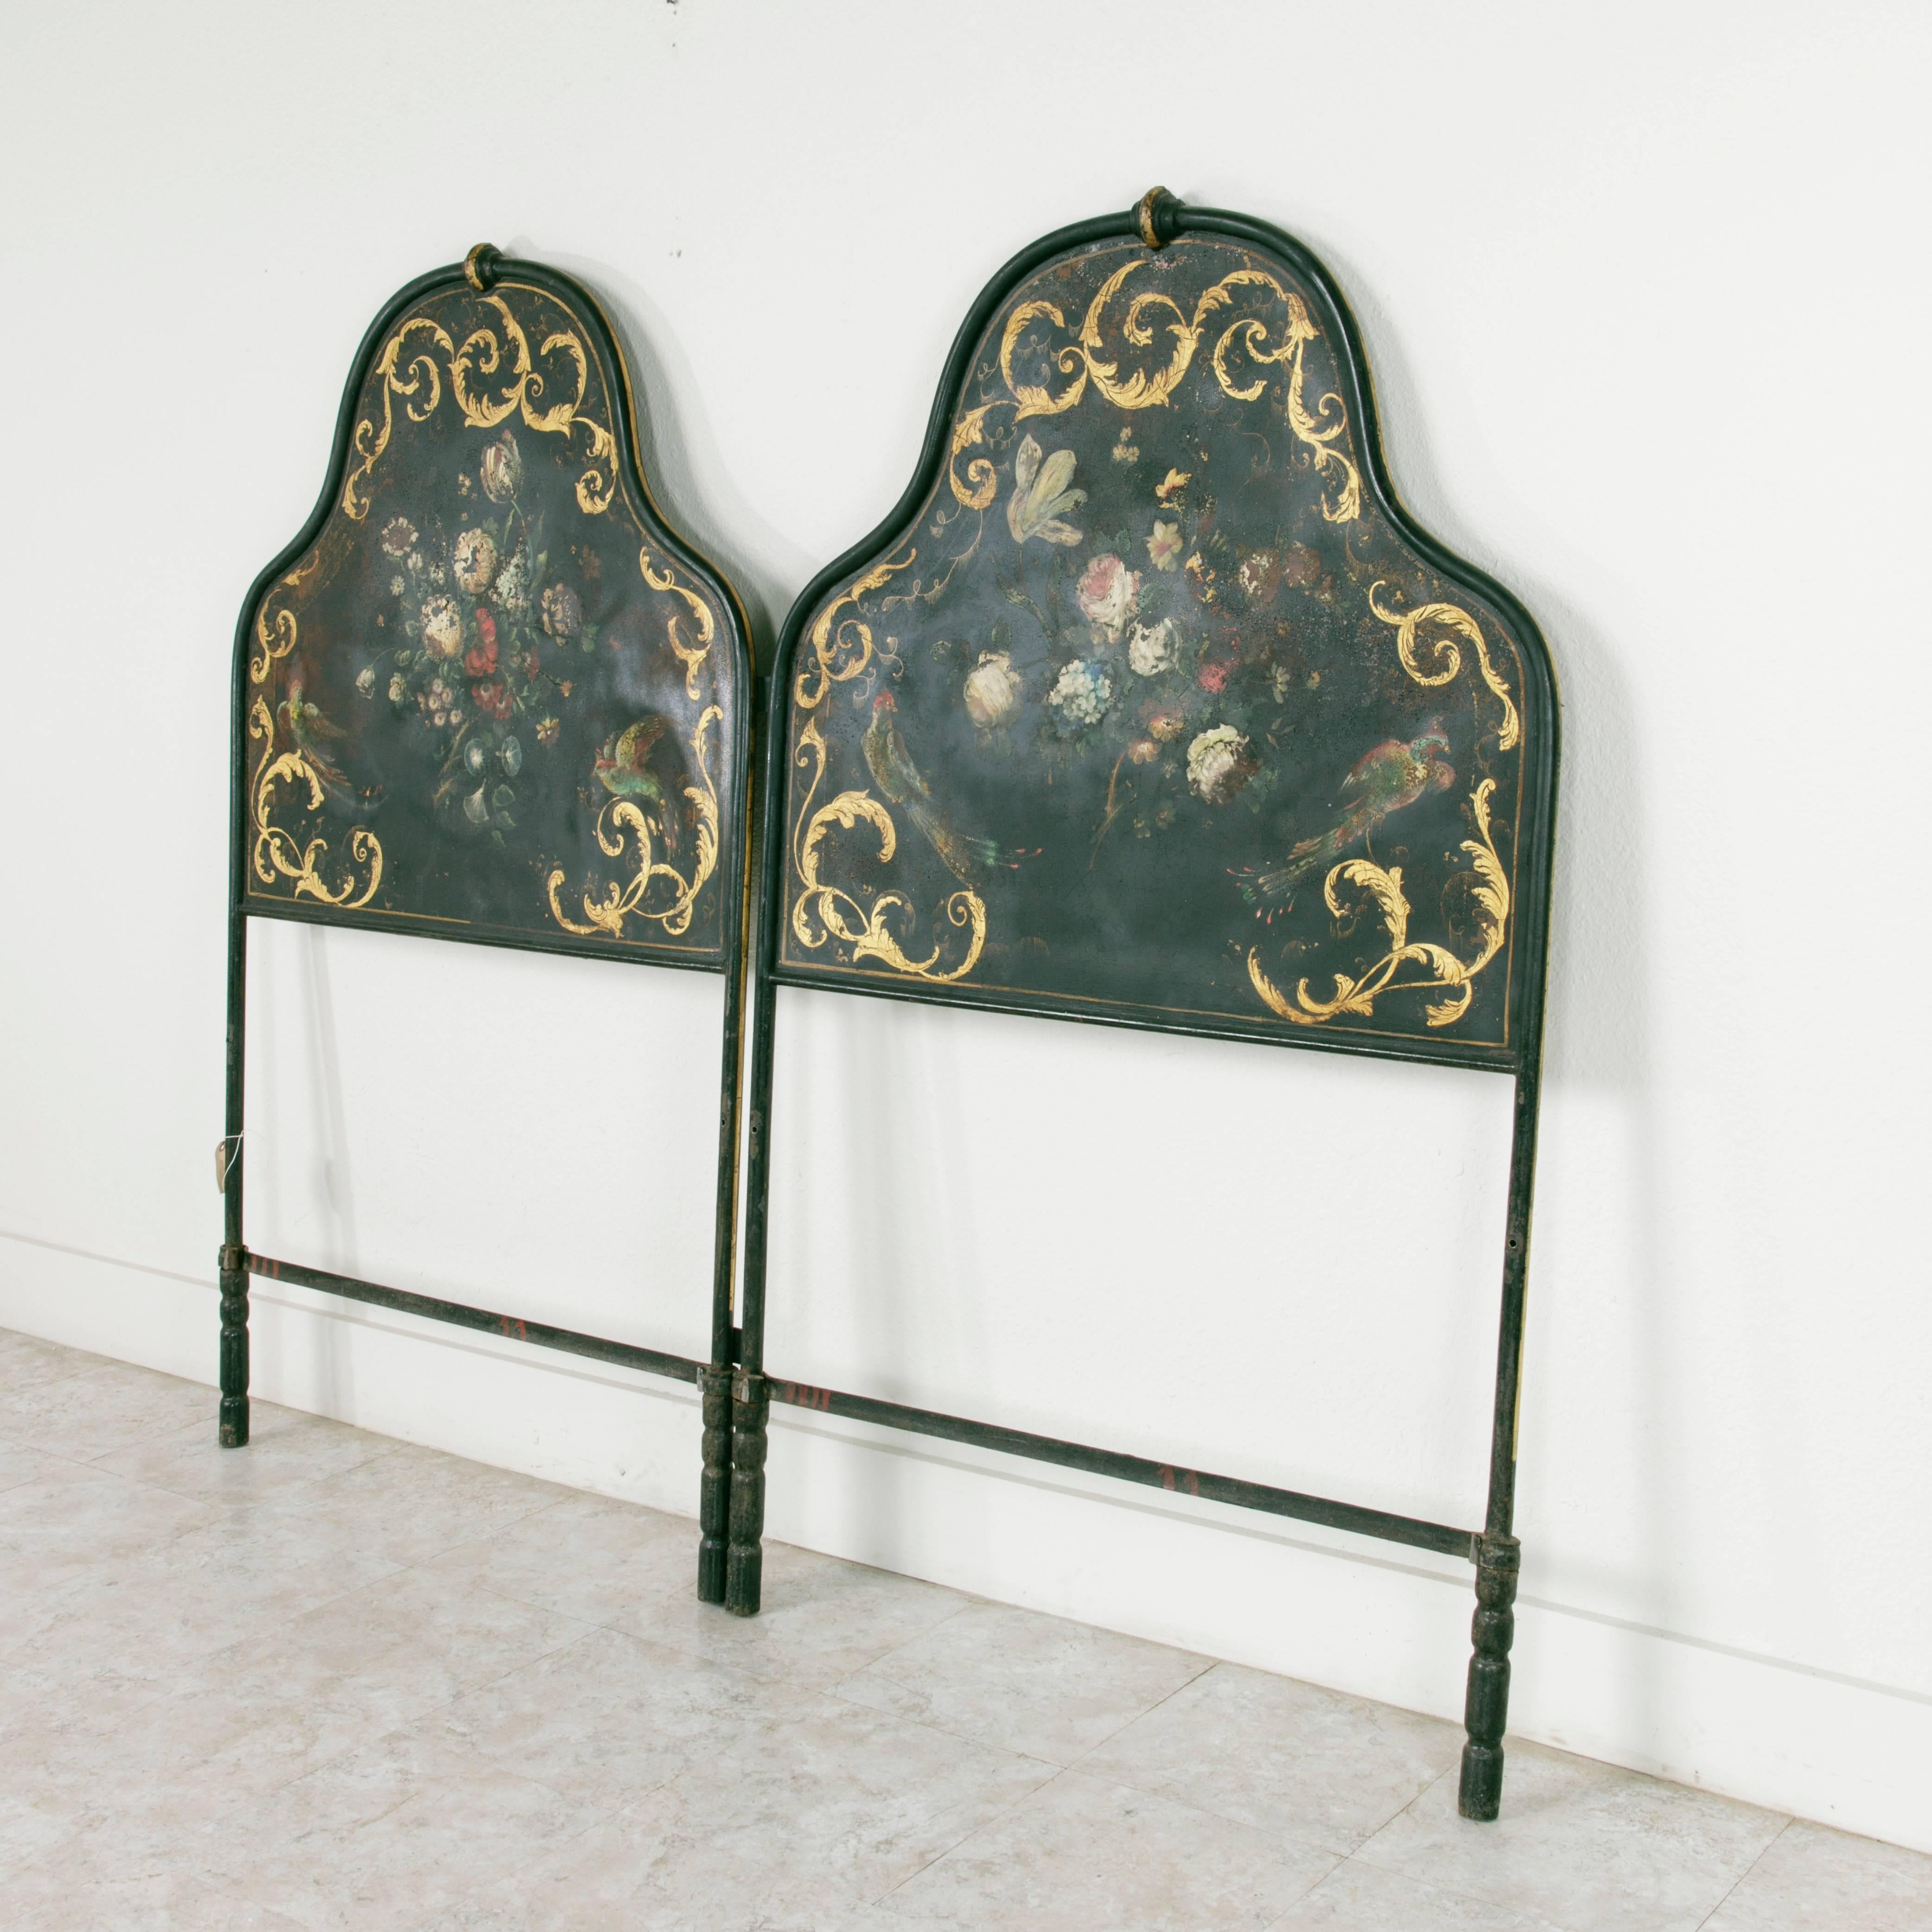 French Hand-Painted and Gilt Napoleon III Period Headboard for Queen or King Bed